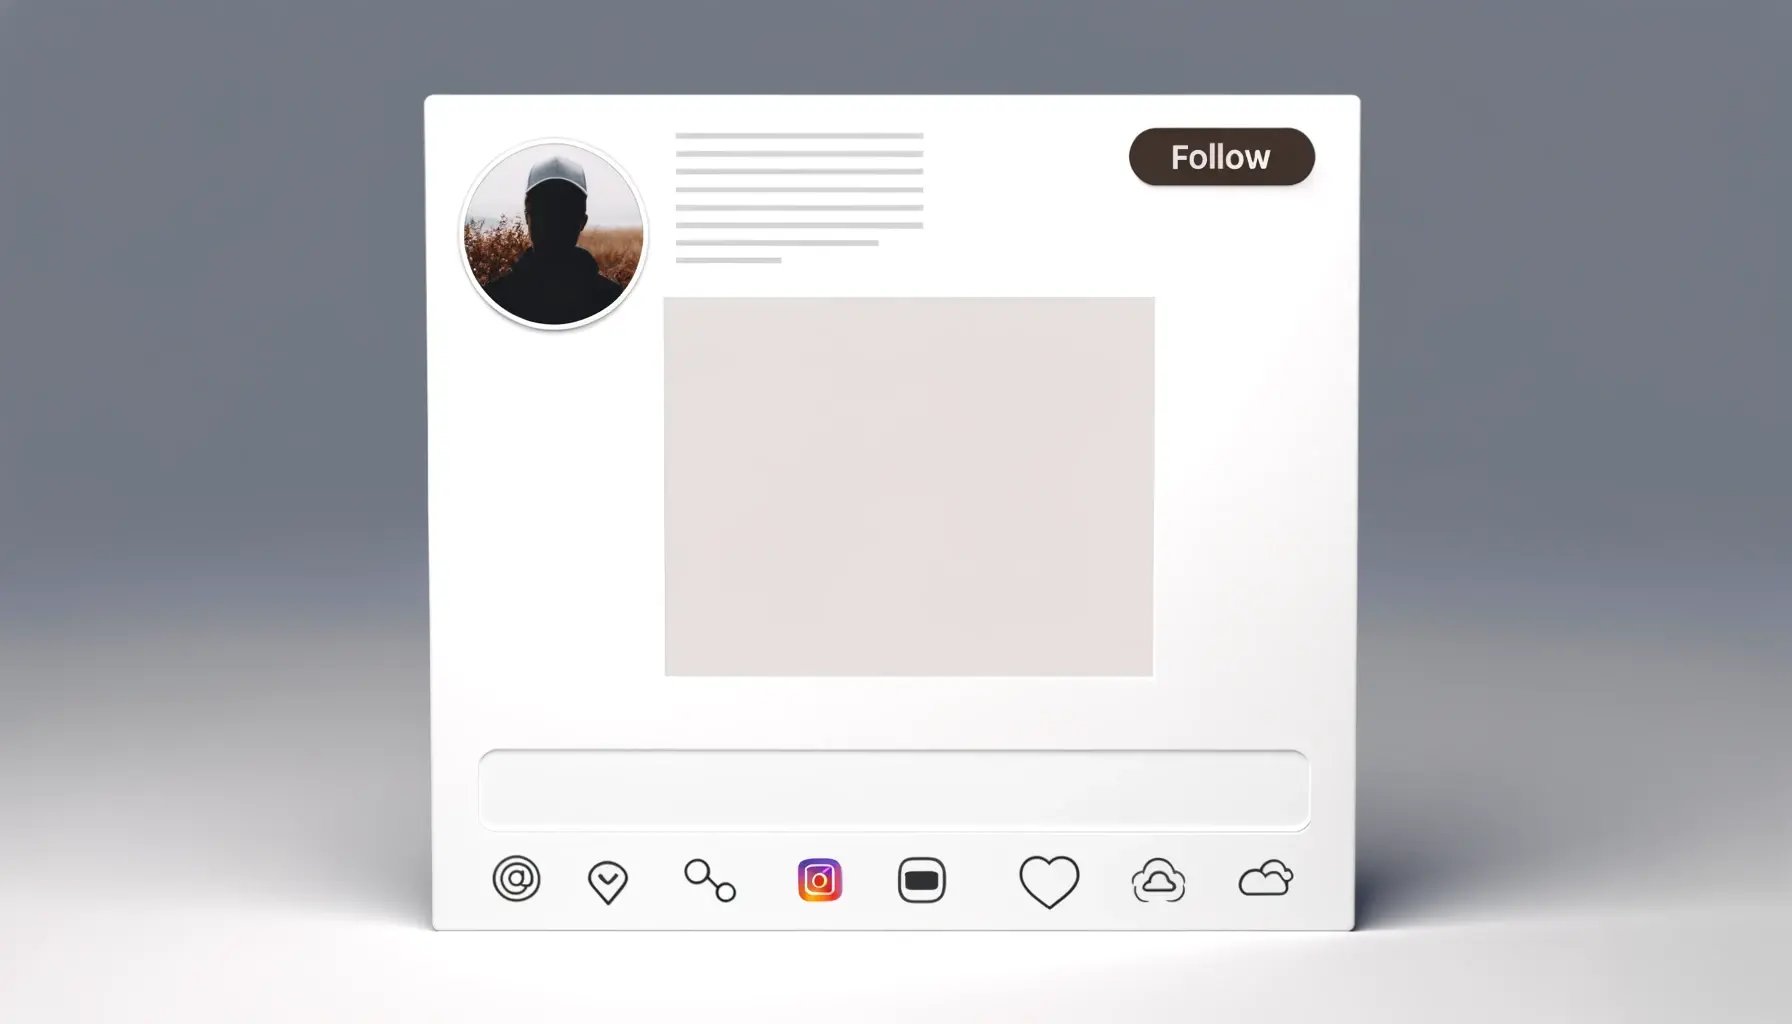 DALL·E 2024-06-10 10.59.54 - A minimalist style horizontal image resembling an Instagram interface. The image includes a profile picture in the top left corner, a username next to